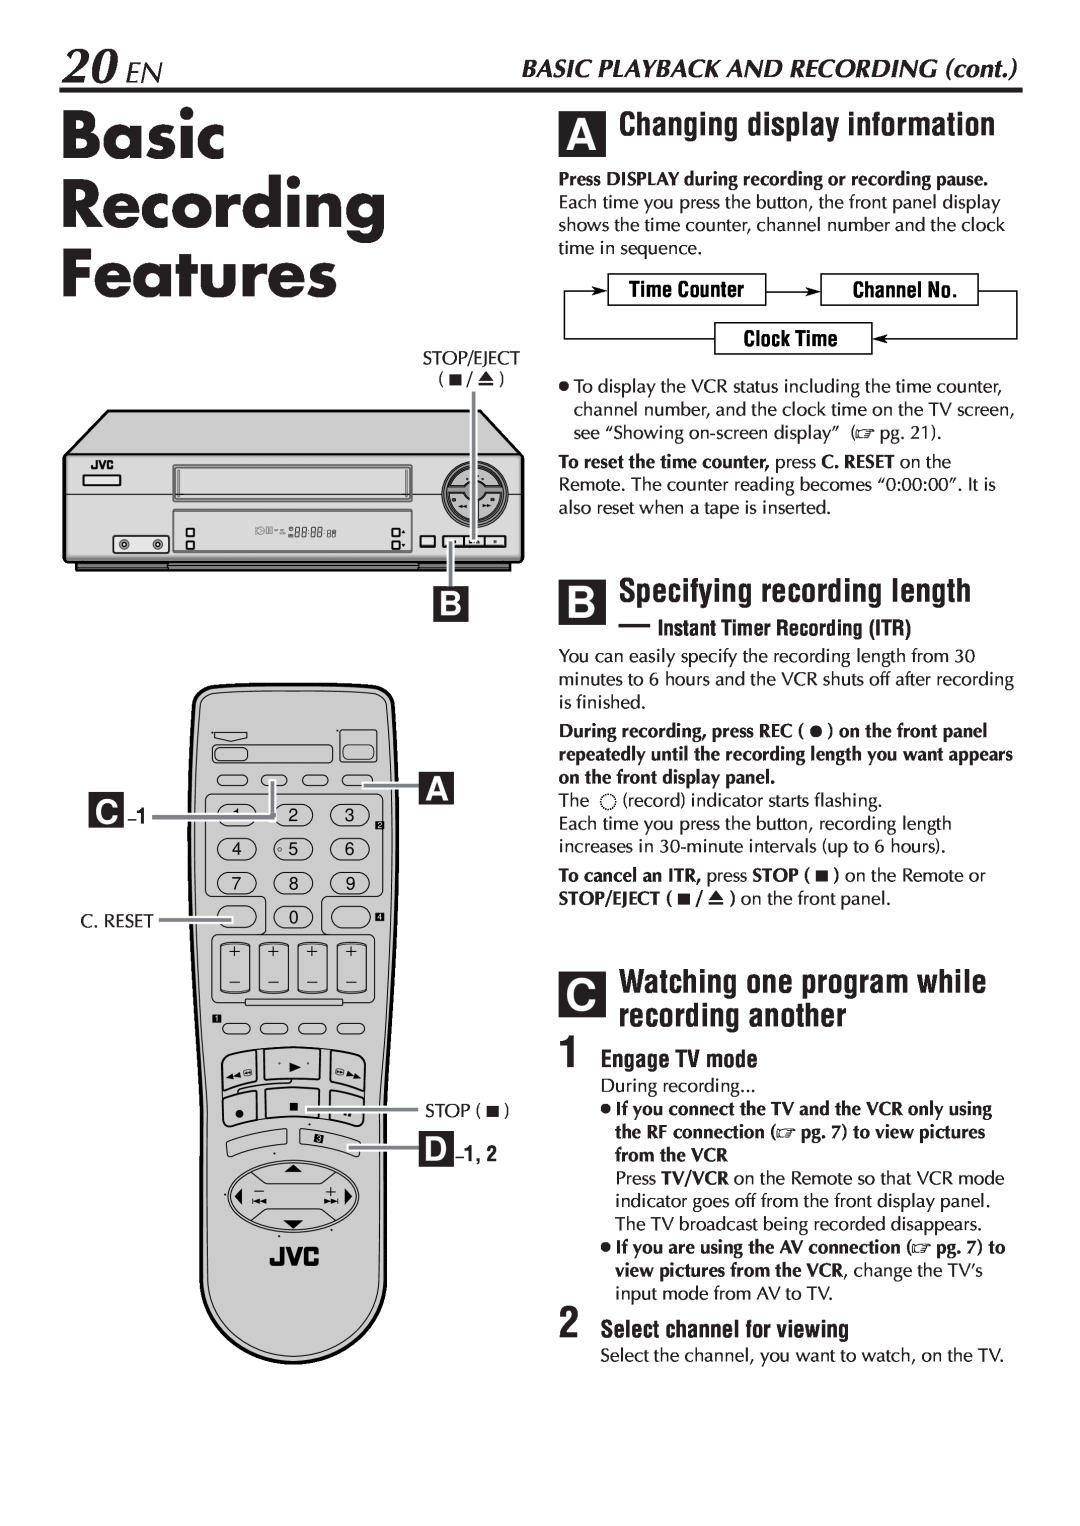 JVC HR-A47U Basic Recording Features, 20 EN, C, B Specifying recording length, Engage TV mode, Select channel for viewing 